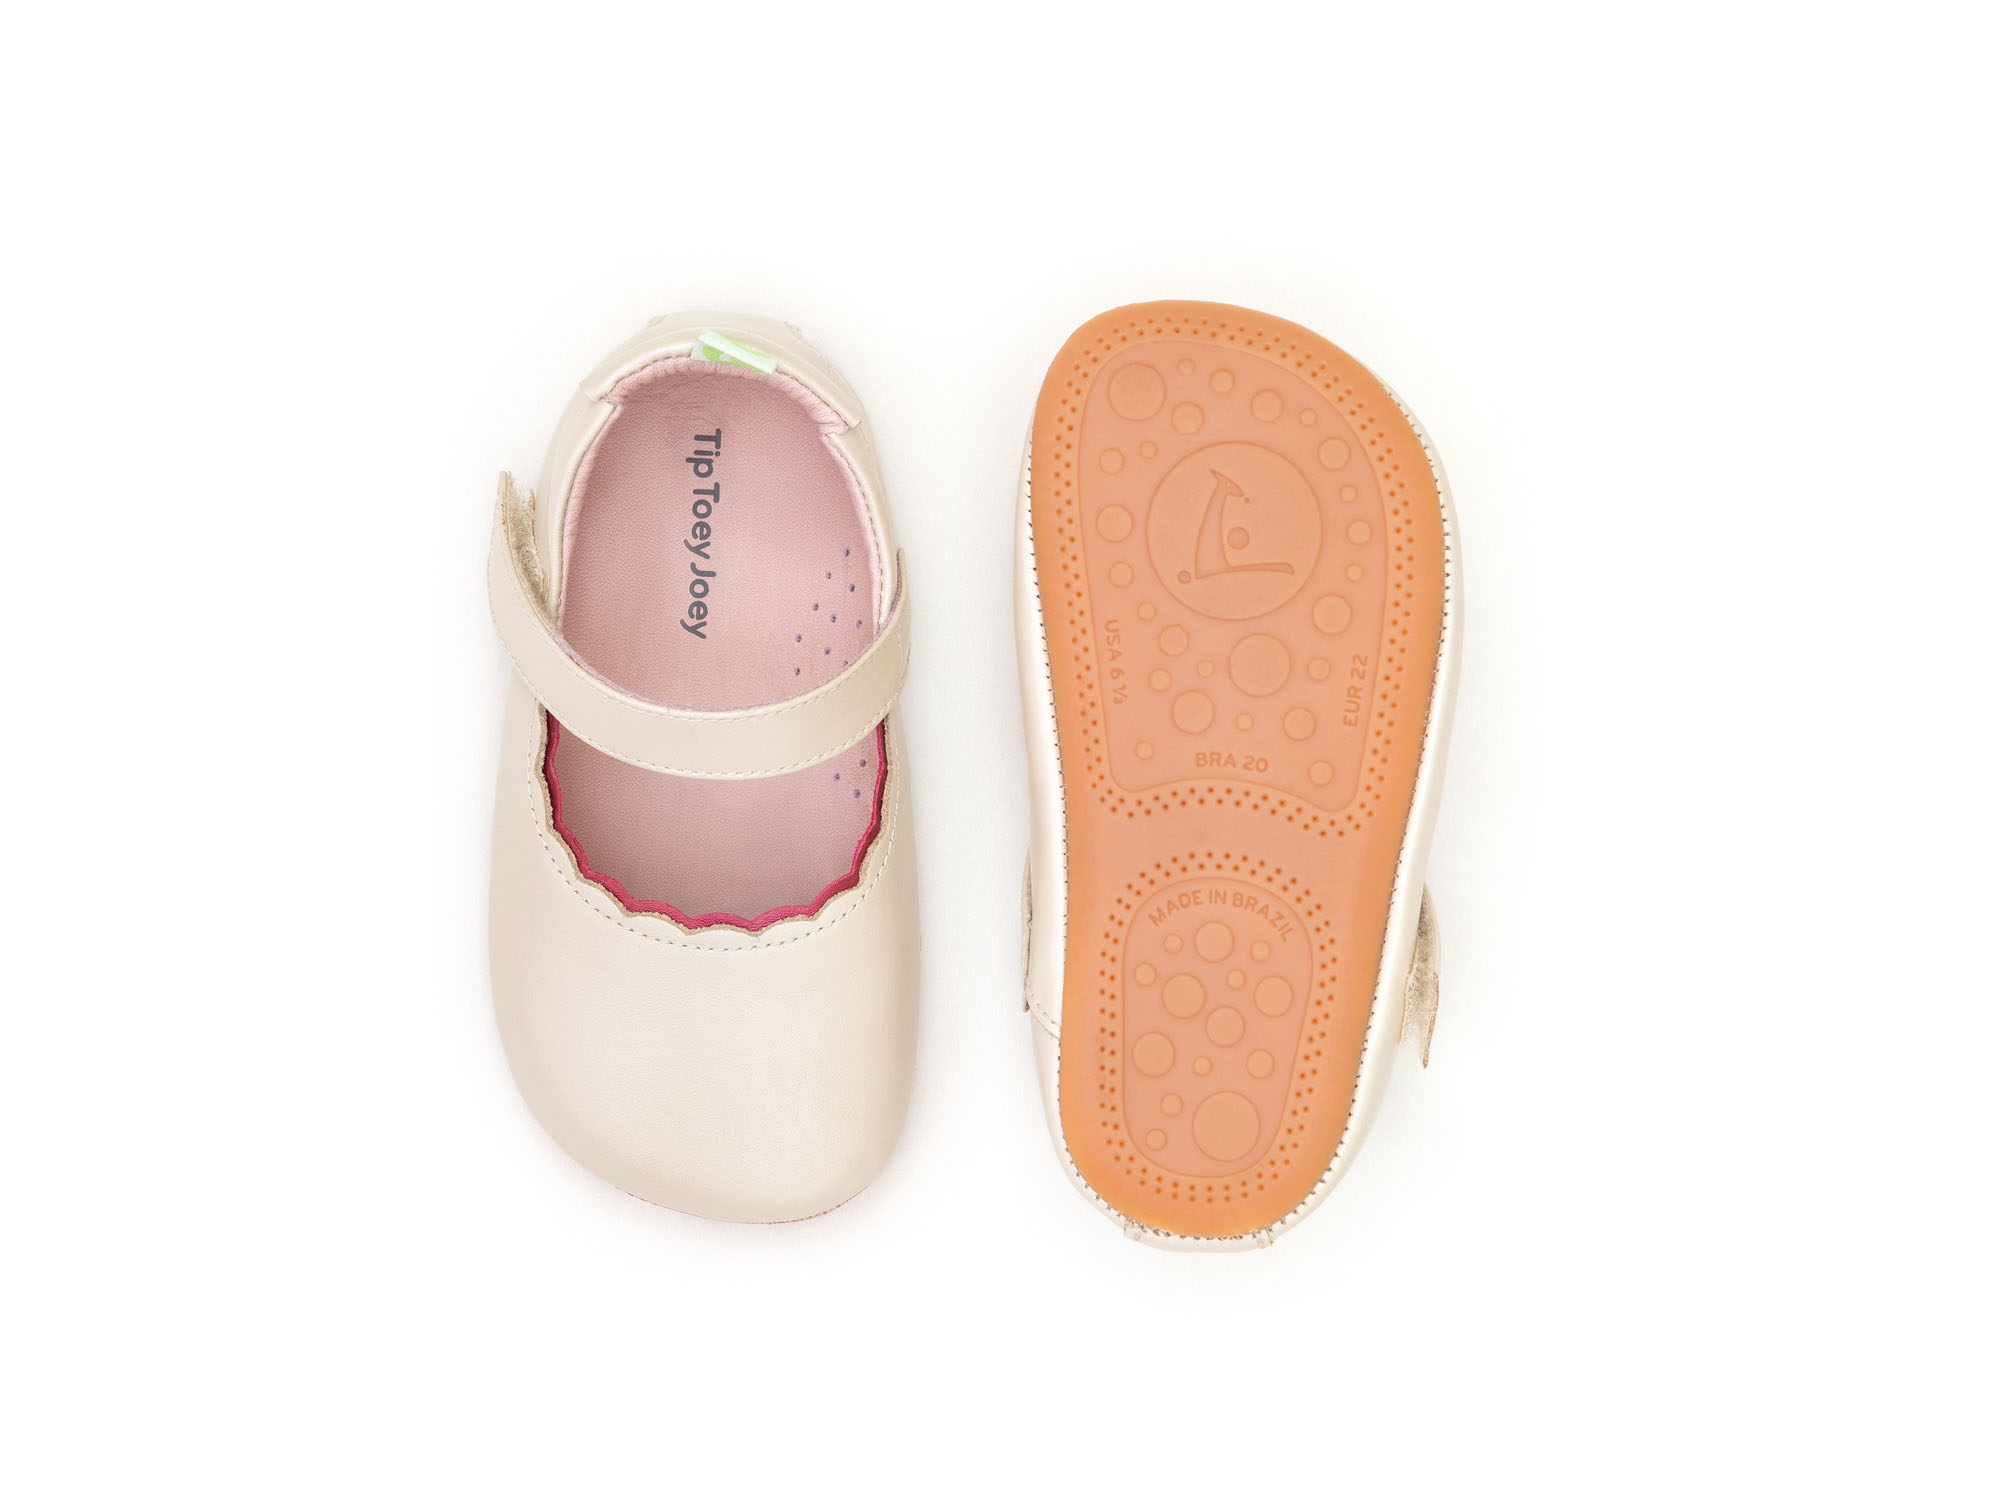 UP & GO Mary Janes for Girls Roundy | Tip Toey Joey - Australia - 5